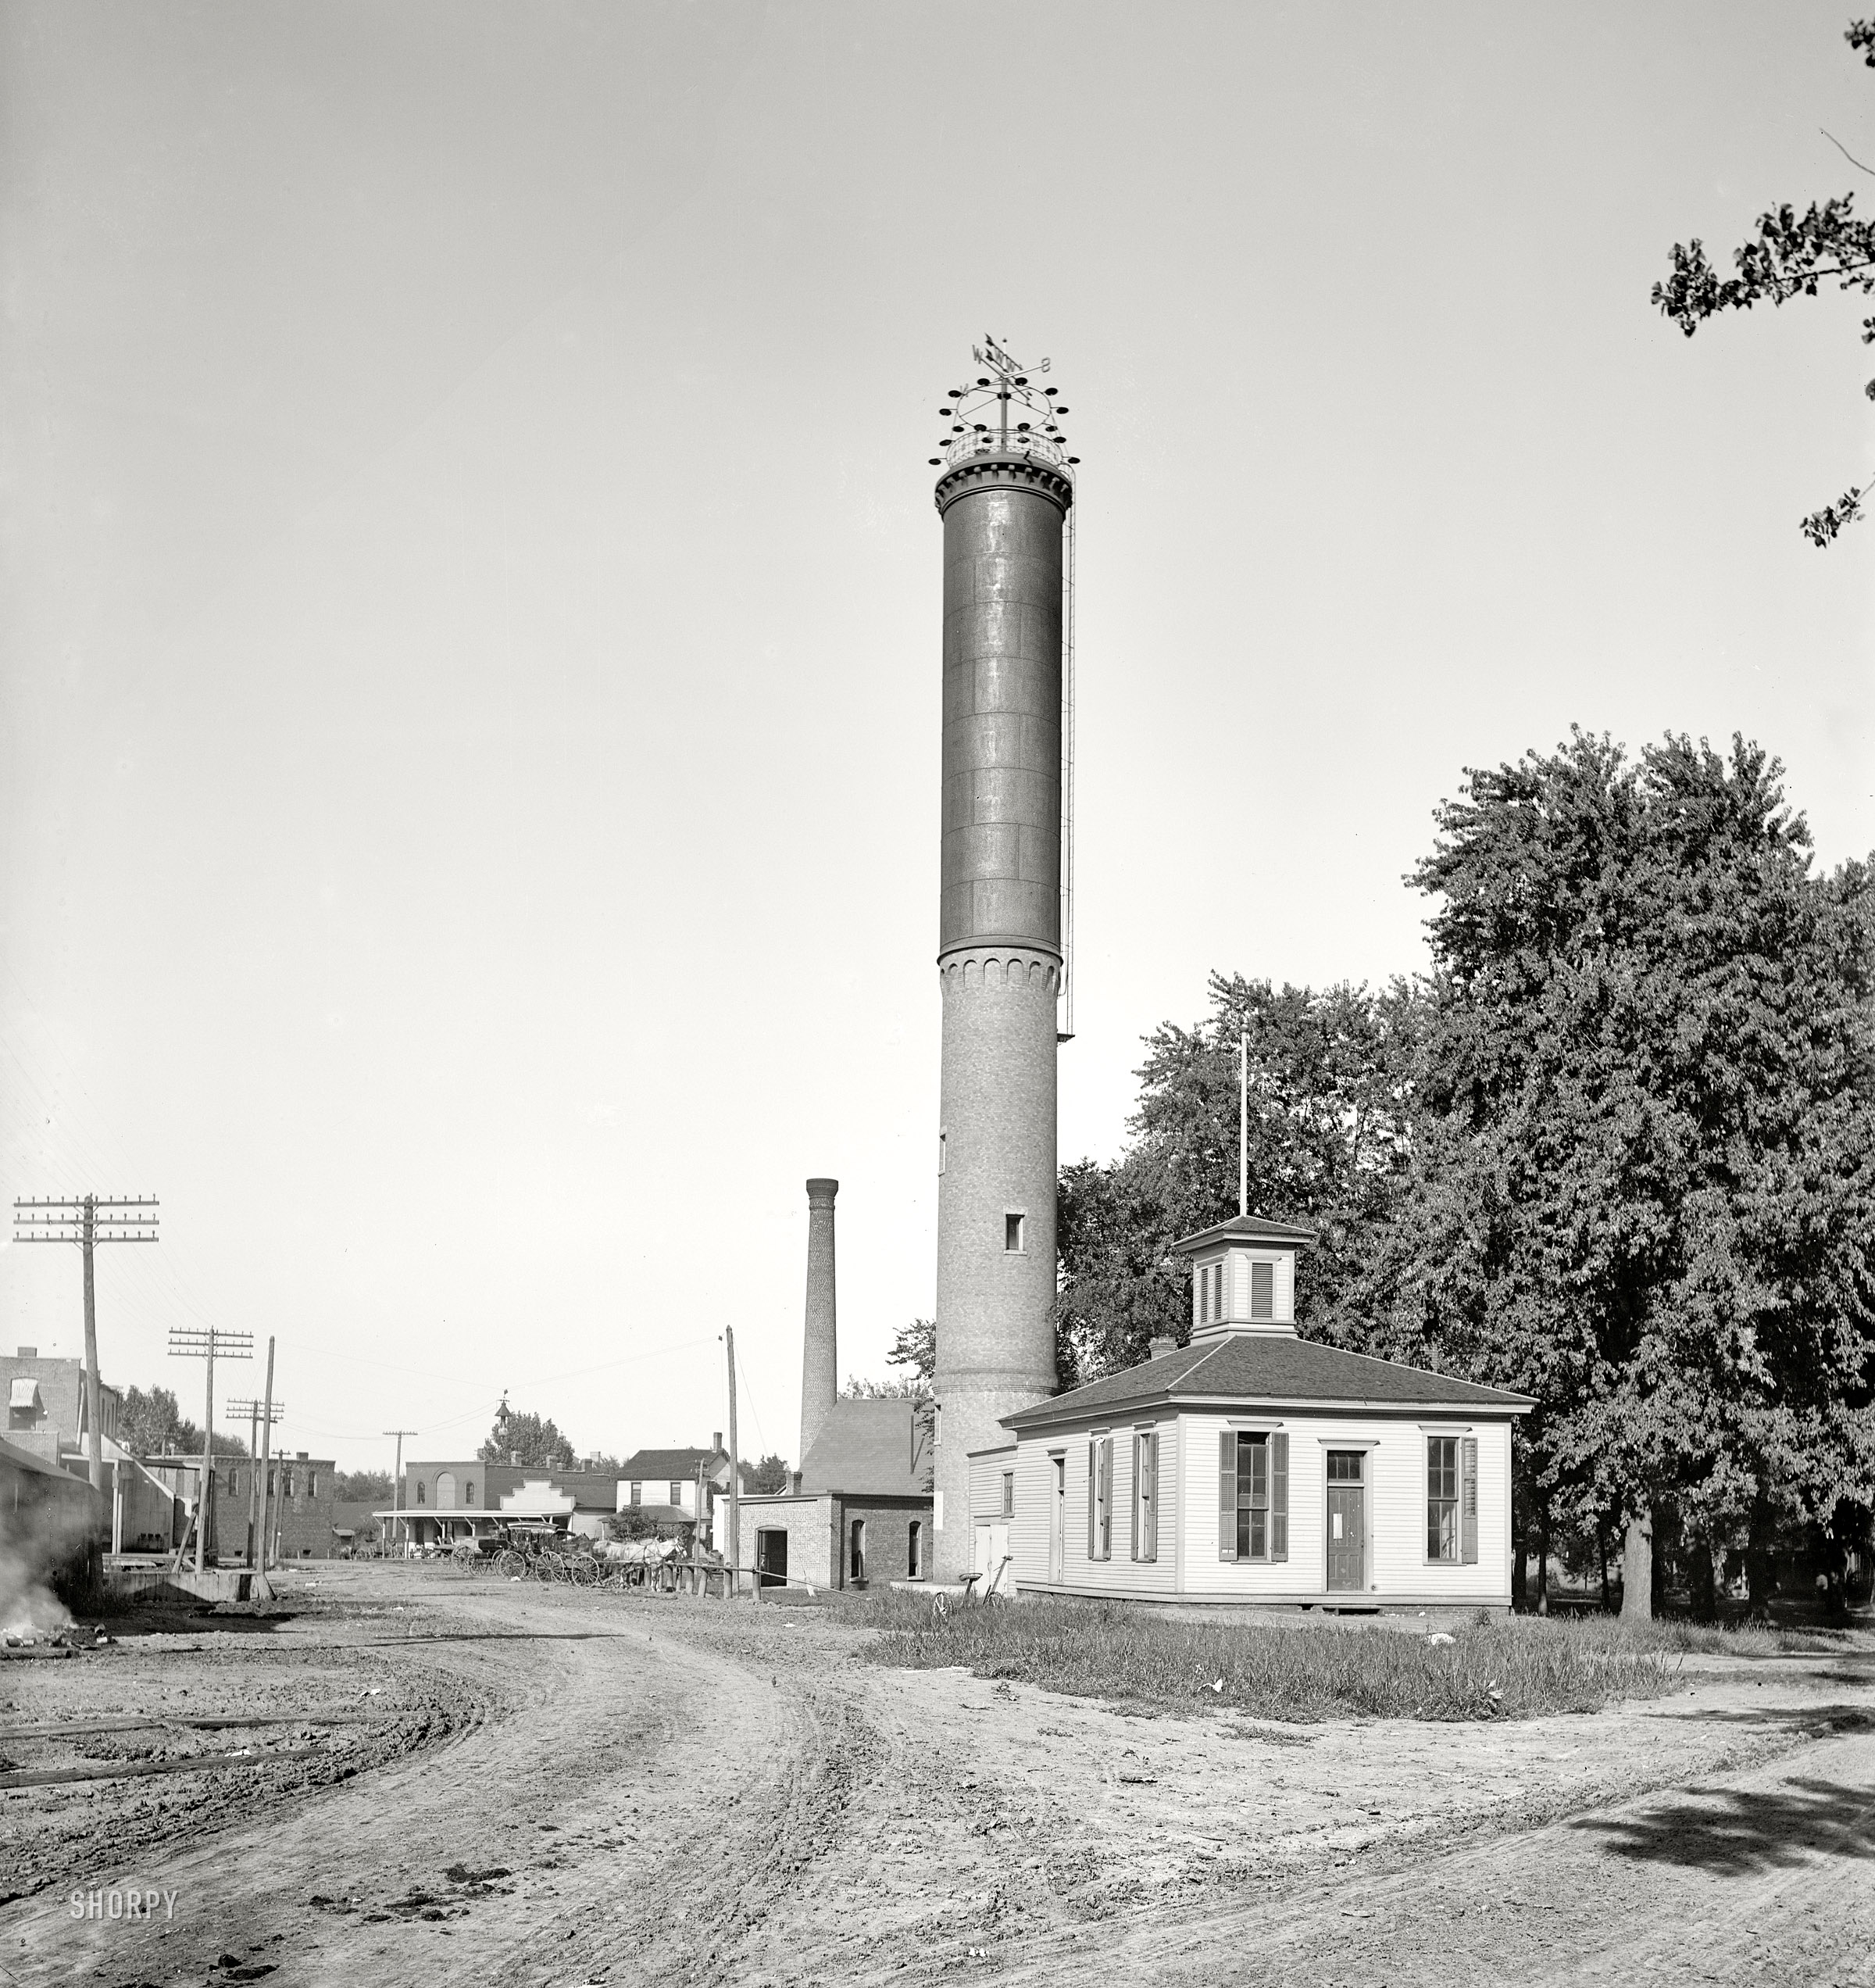 Circa 1900. "Water tower in Dwight, Illinois." Unusual columnar design with a brick base, topped off by a weather vane and lights -- a sort of smokestack-lighthouse-watertower hybrid. Detroit Publishing glass negative. View full size.